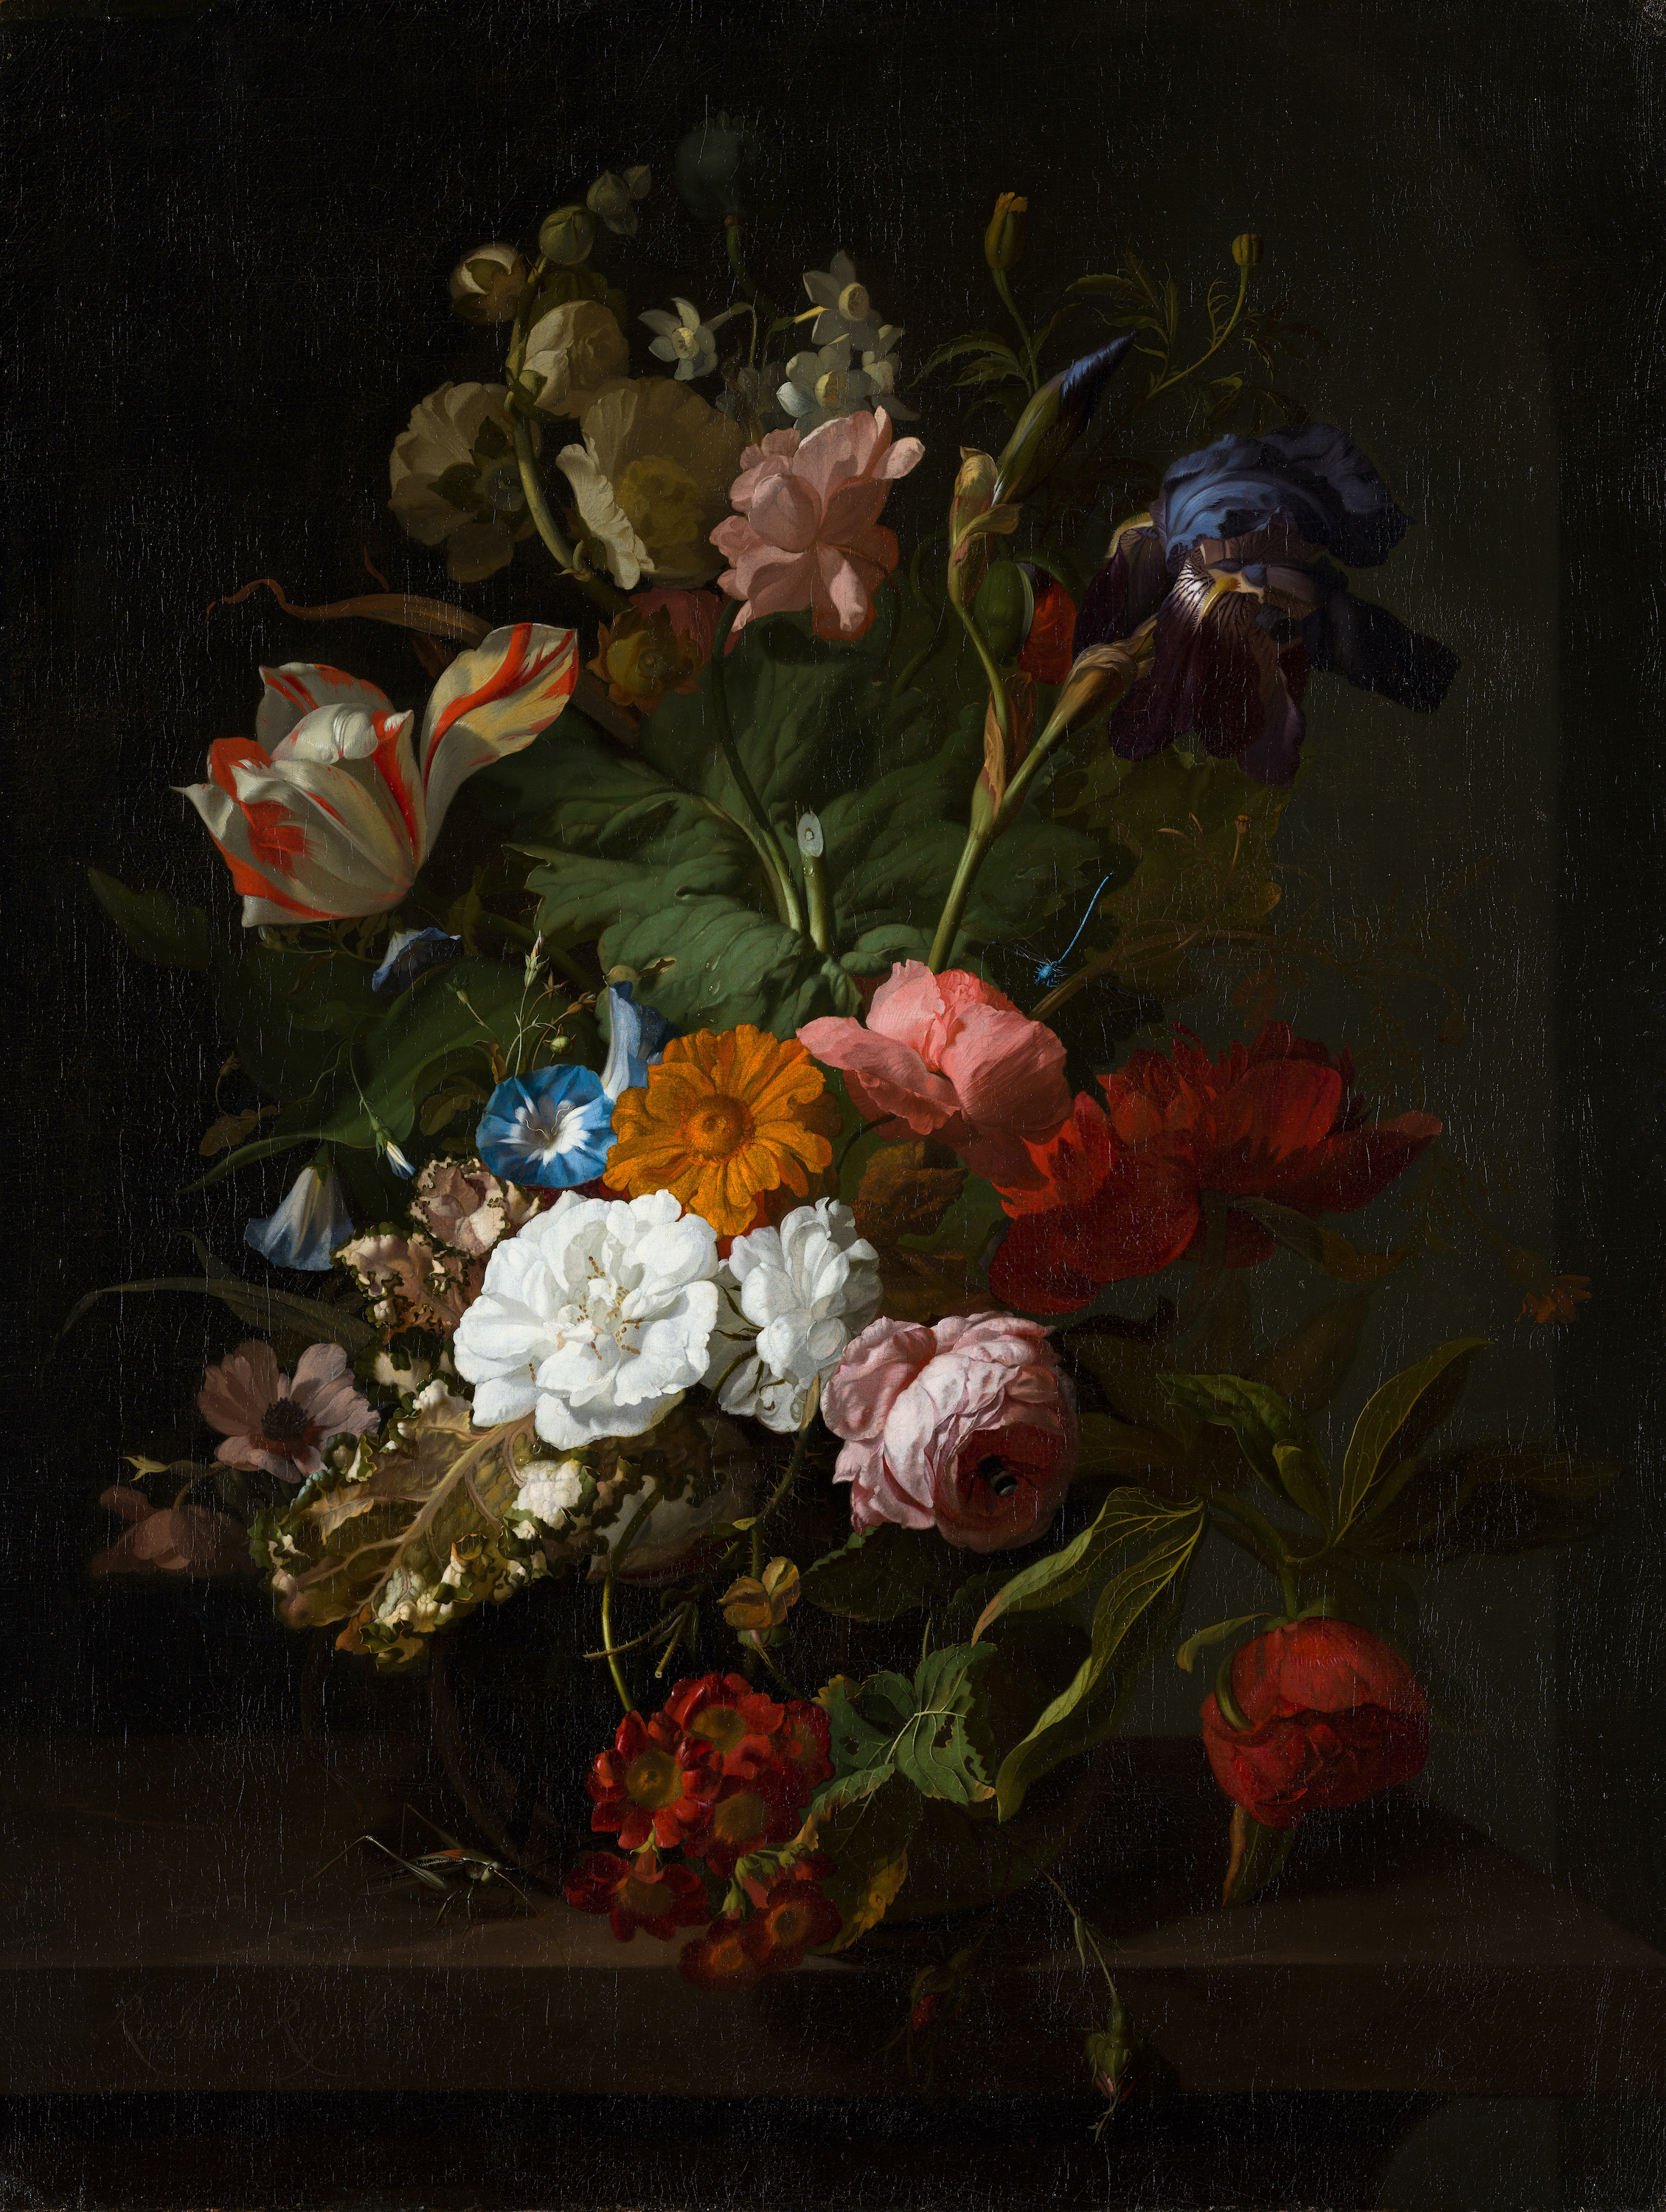 Vase with Flowers by Rachel Ruysch - 1700 - 79,5 x 60,2 cm Mauritshuis, The Hague